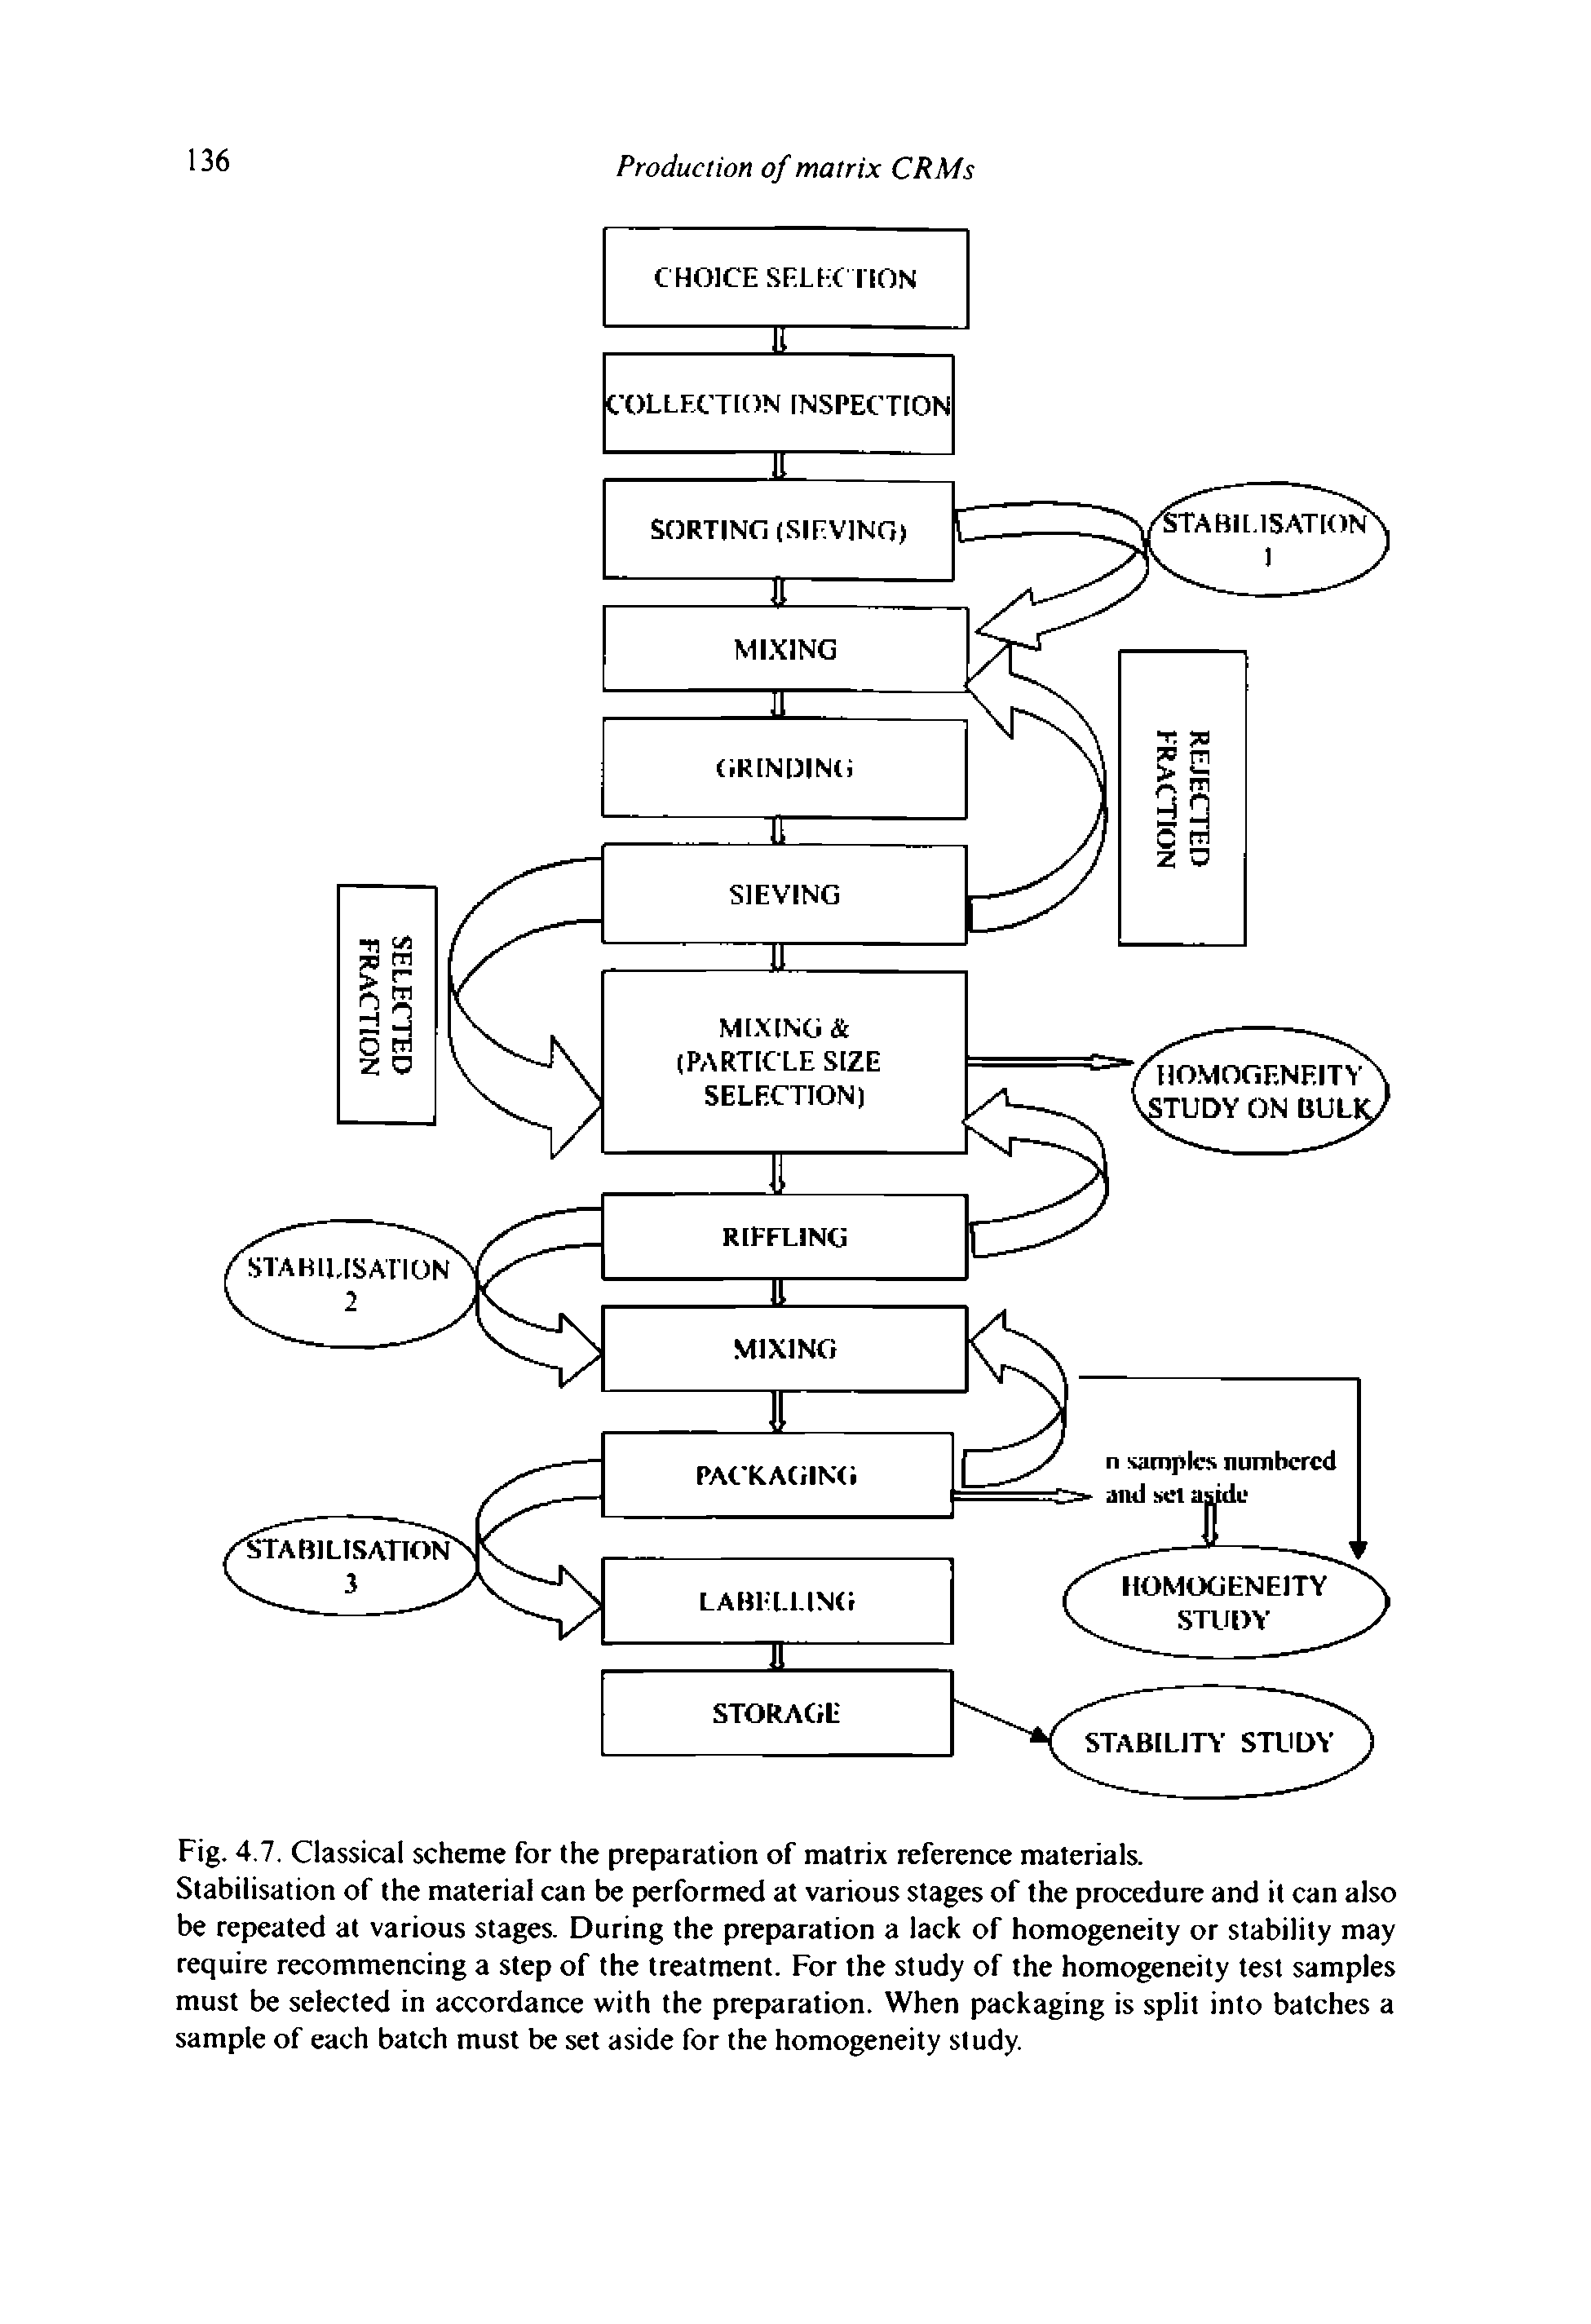 Fig. 4.7. Classical scheme for the preparation of matrix reference materials.